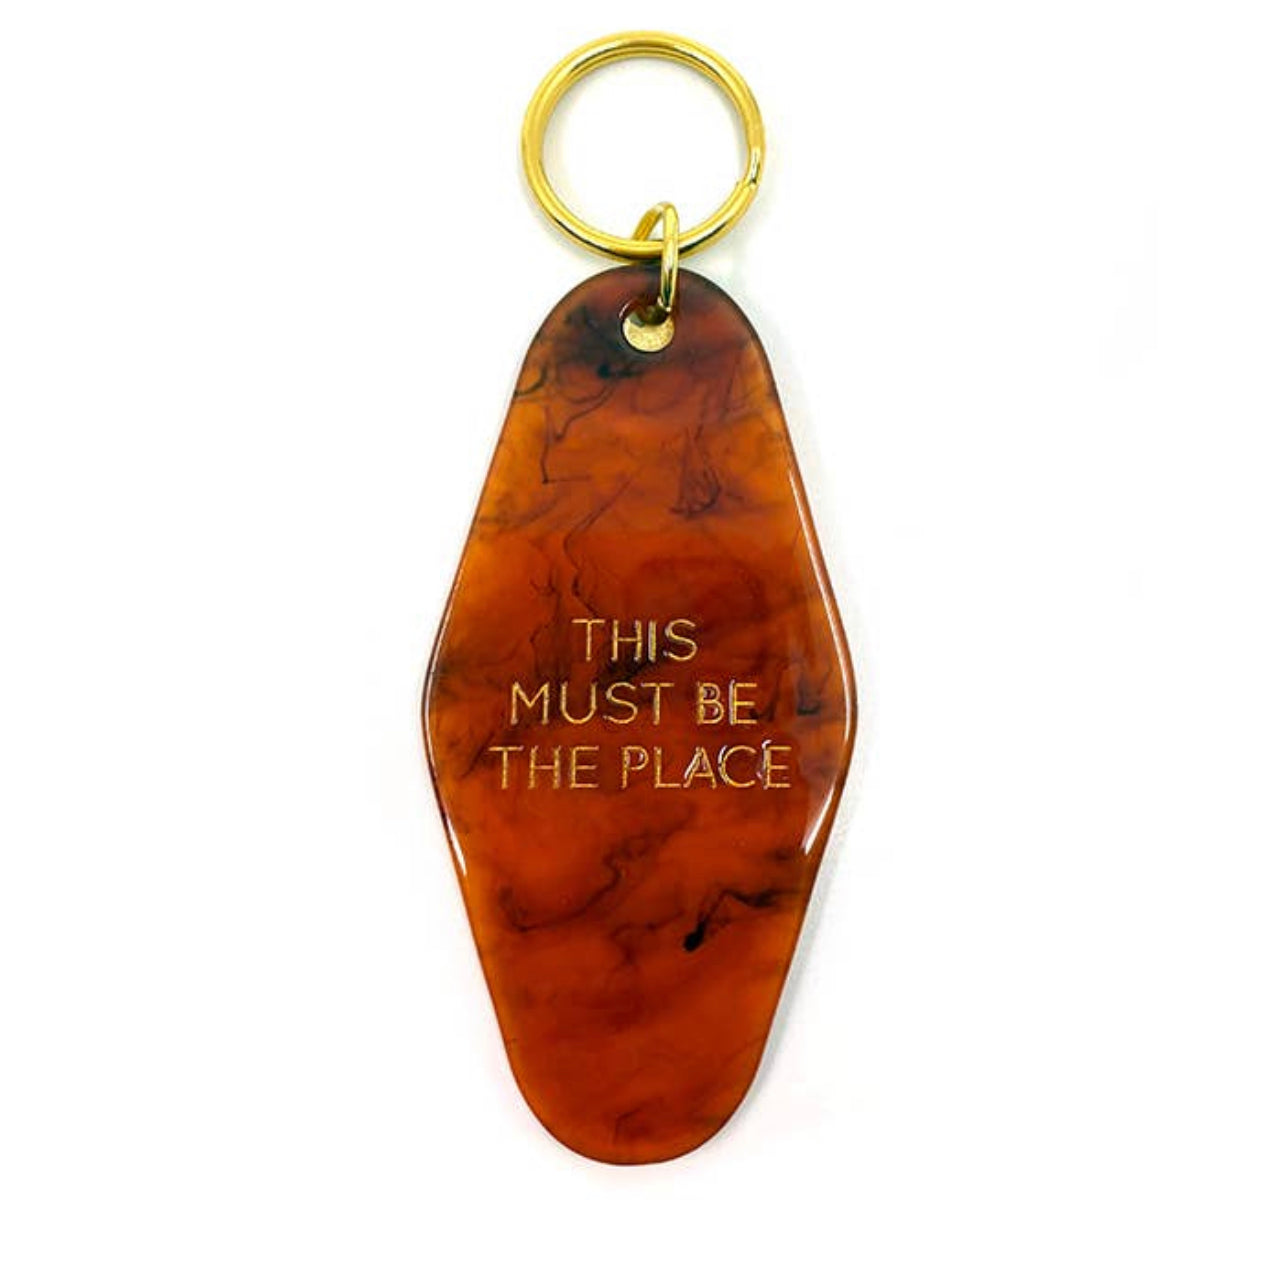 Tortoise Key Tag ‘This Must Be The Place’